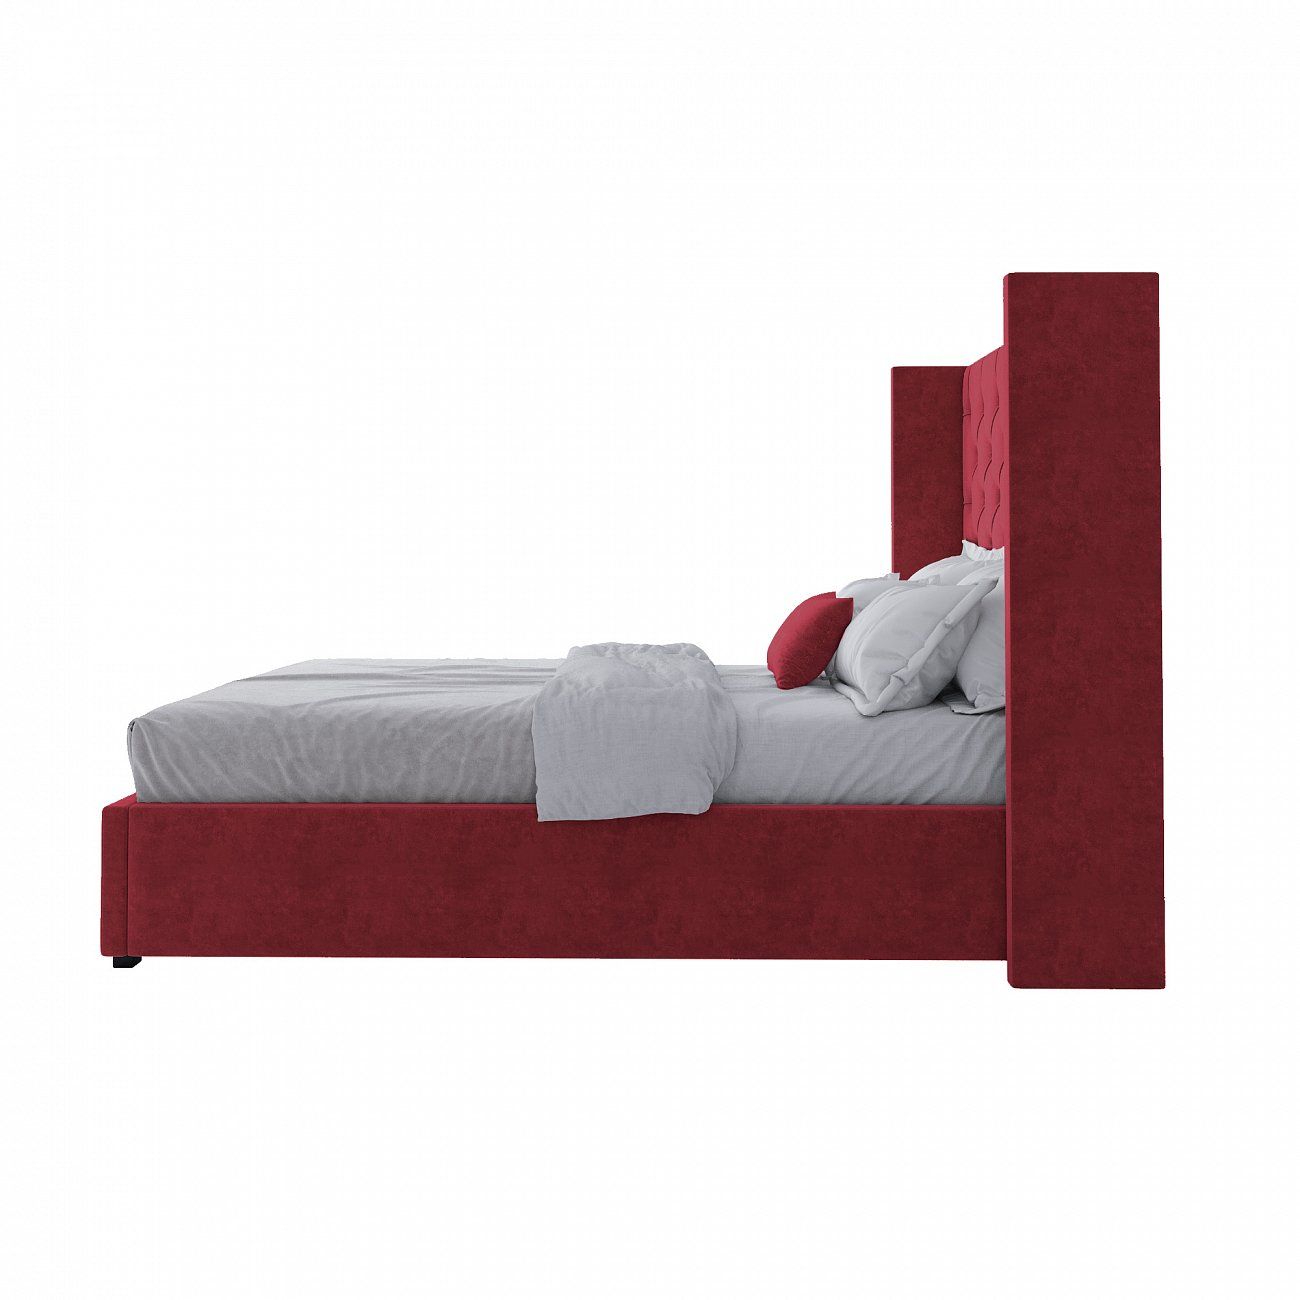 Teenage bed 140x200 cm red with carriage screed without studs Wing-2